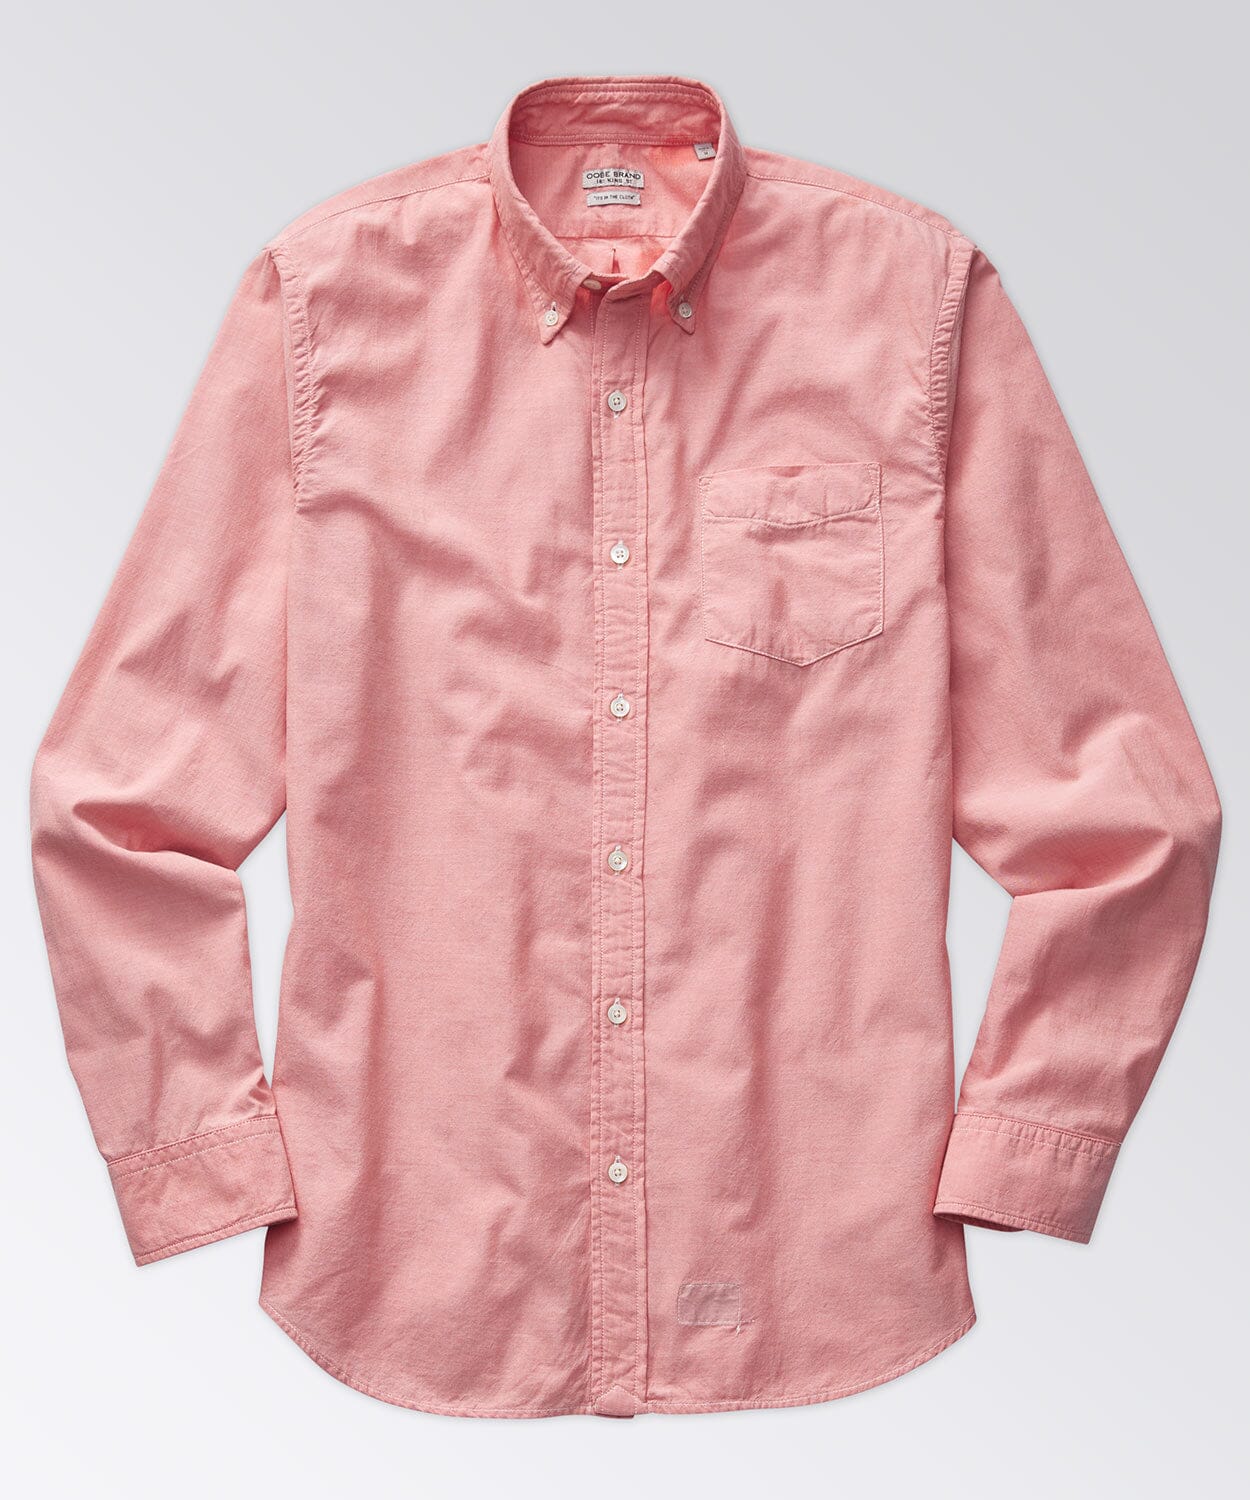 King Street Solid Oxford Shirt Button Downs OOBE BRAND Desert Rose S 